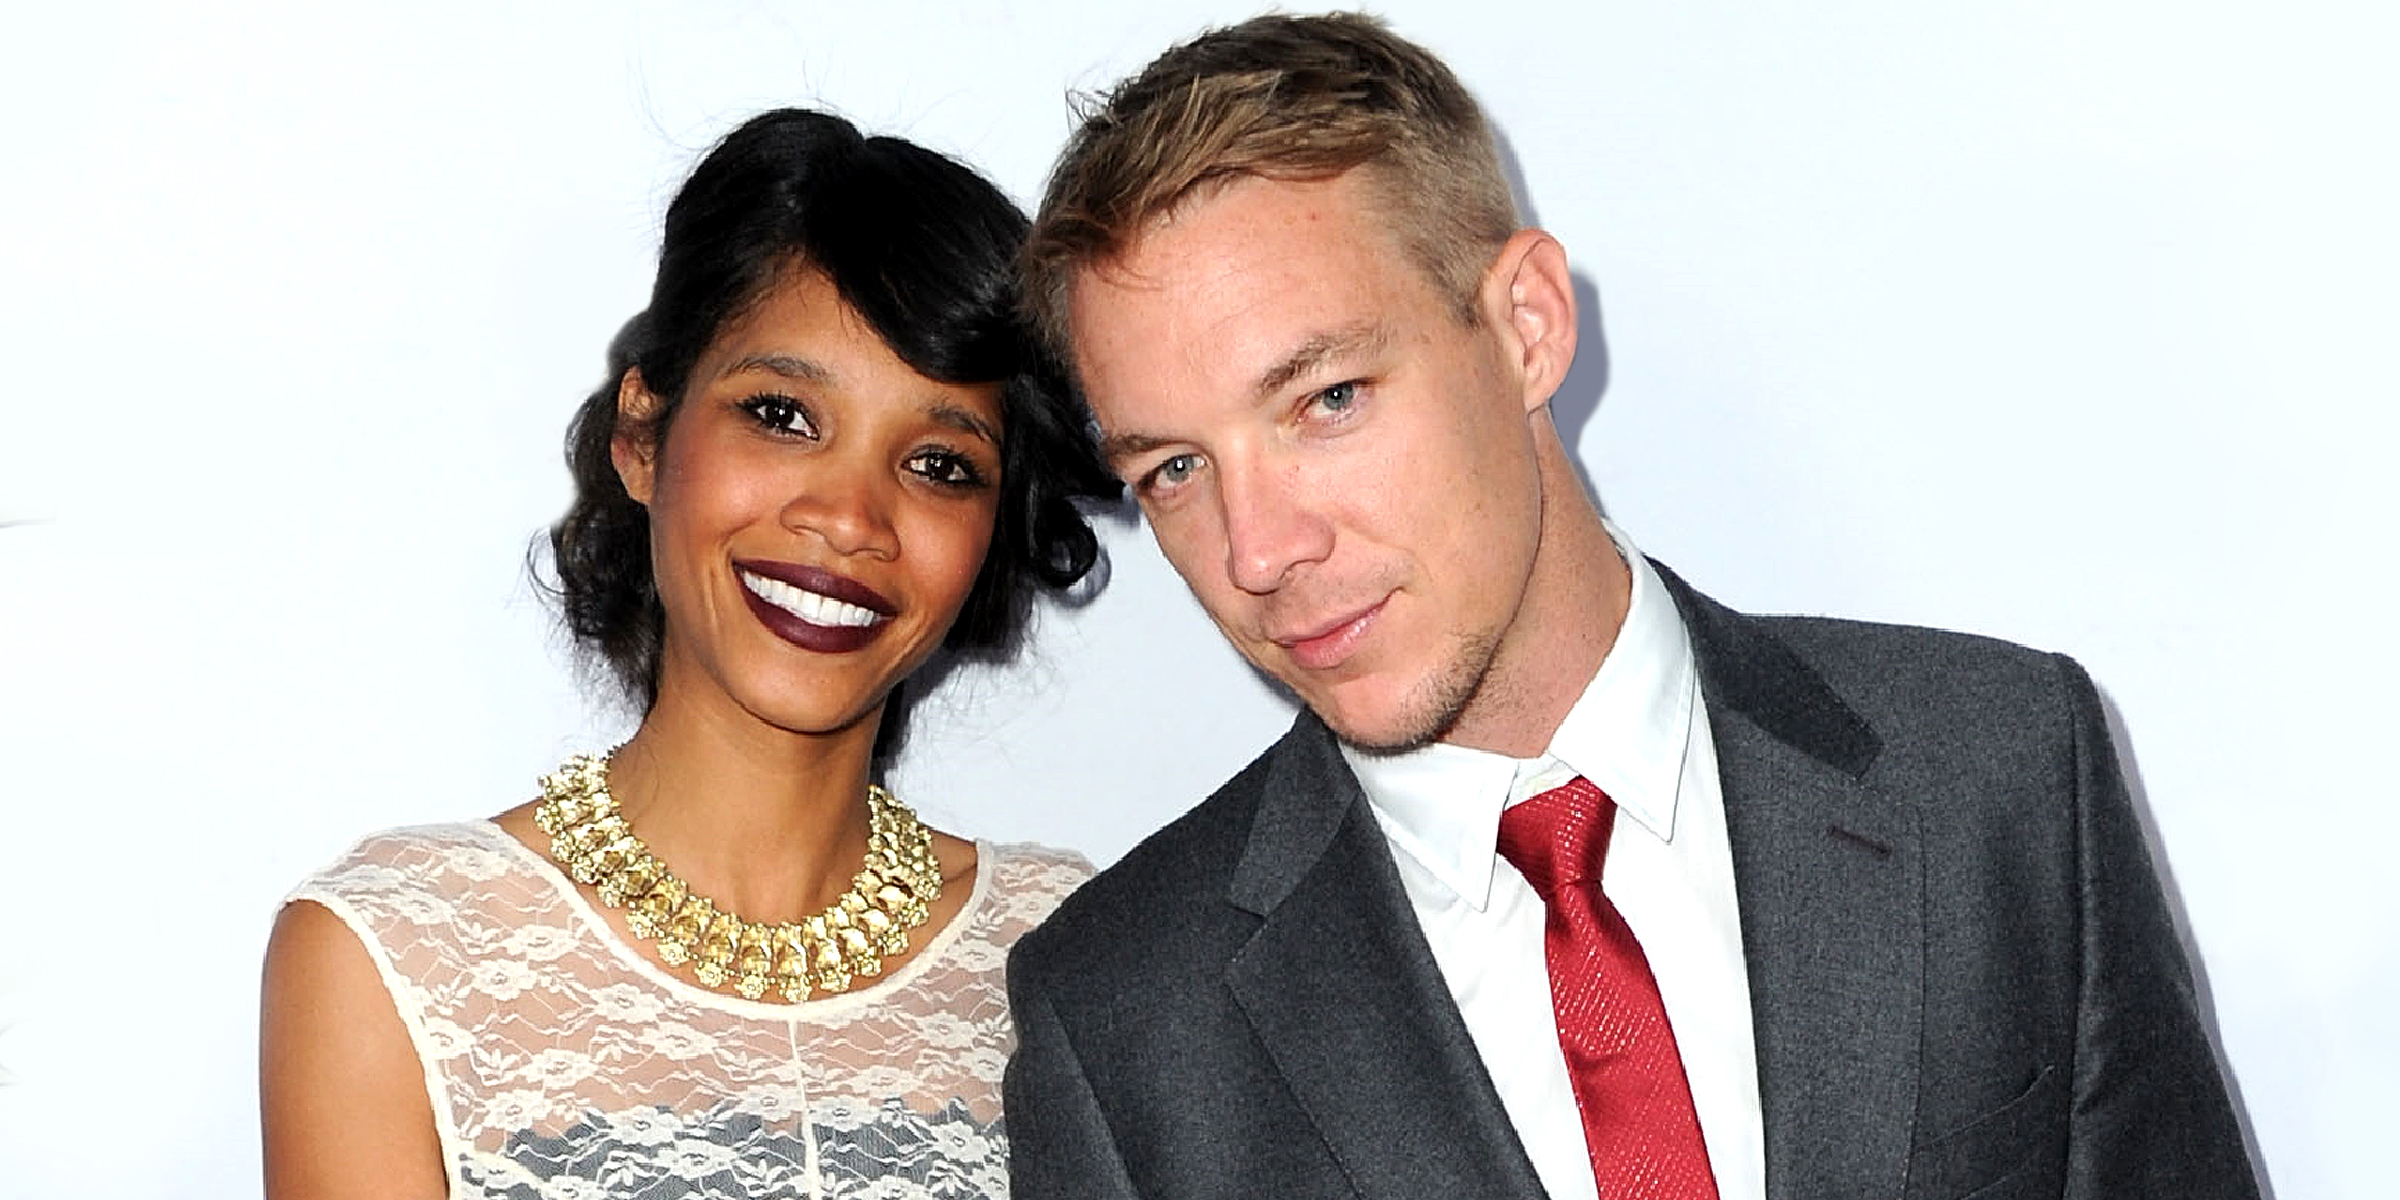 Kathryn Lockhart and Diplo | Source: Getty Images